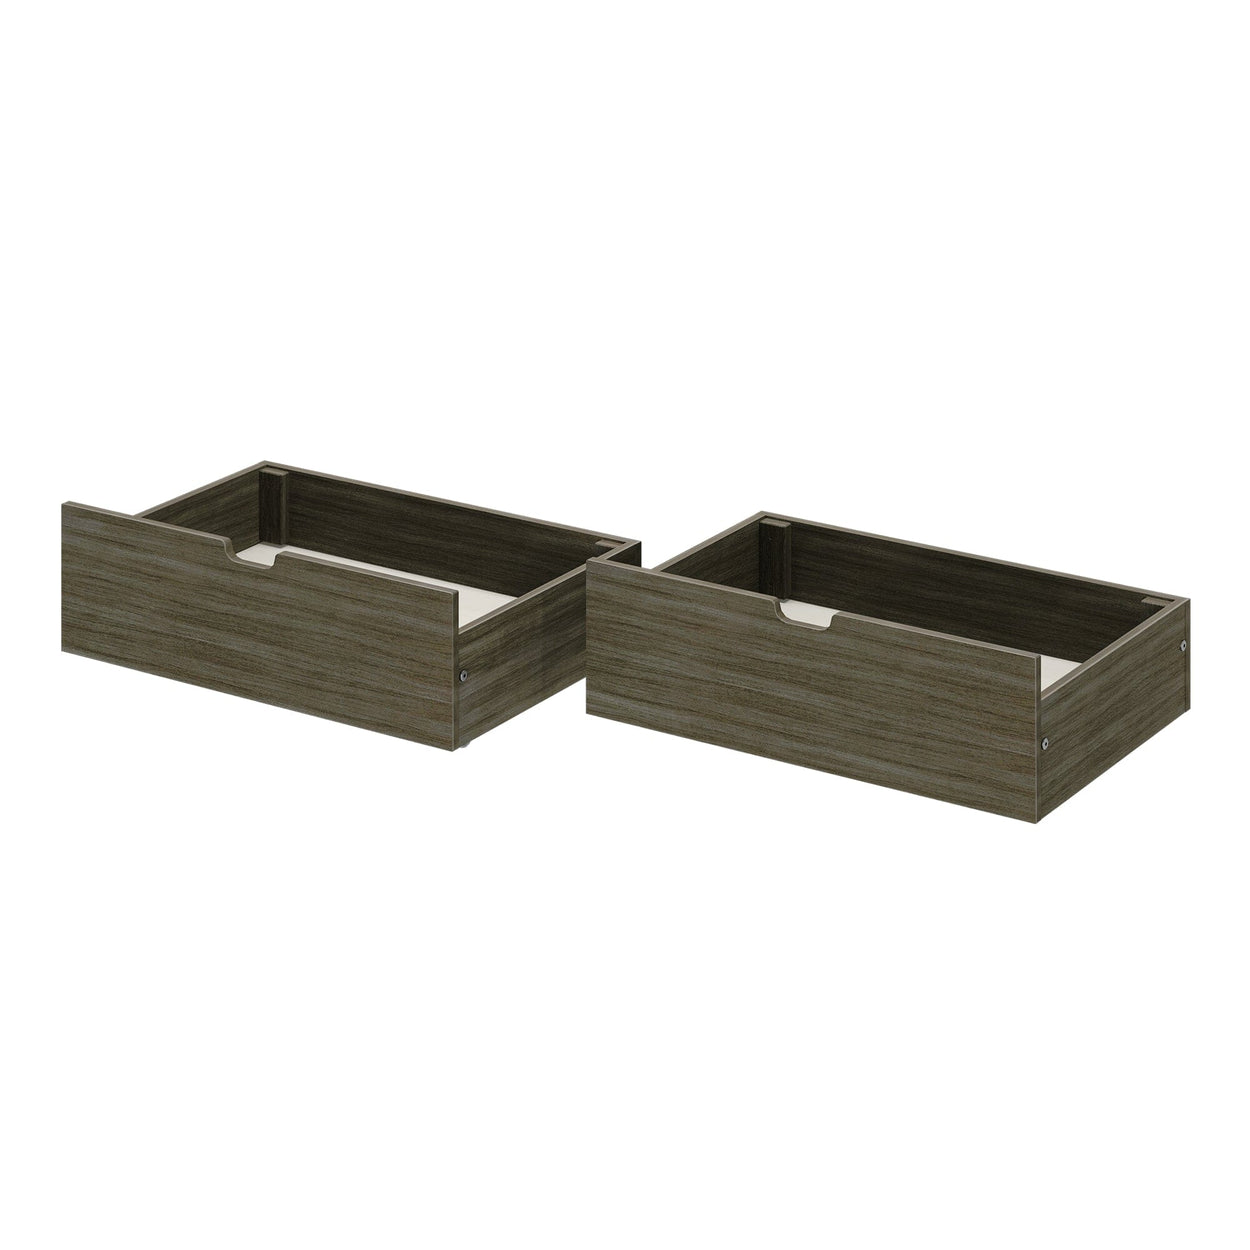 175262-151 : Component 2 Underbed Storage Drawers w/Rubber Castors, Clay